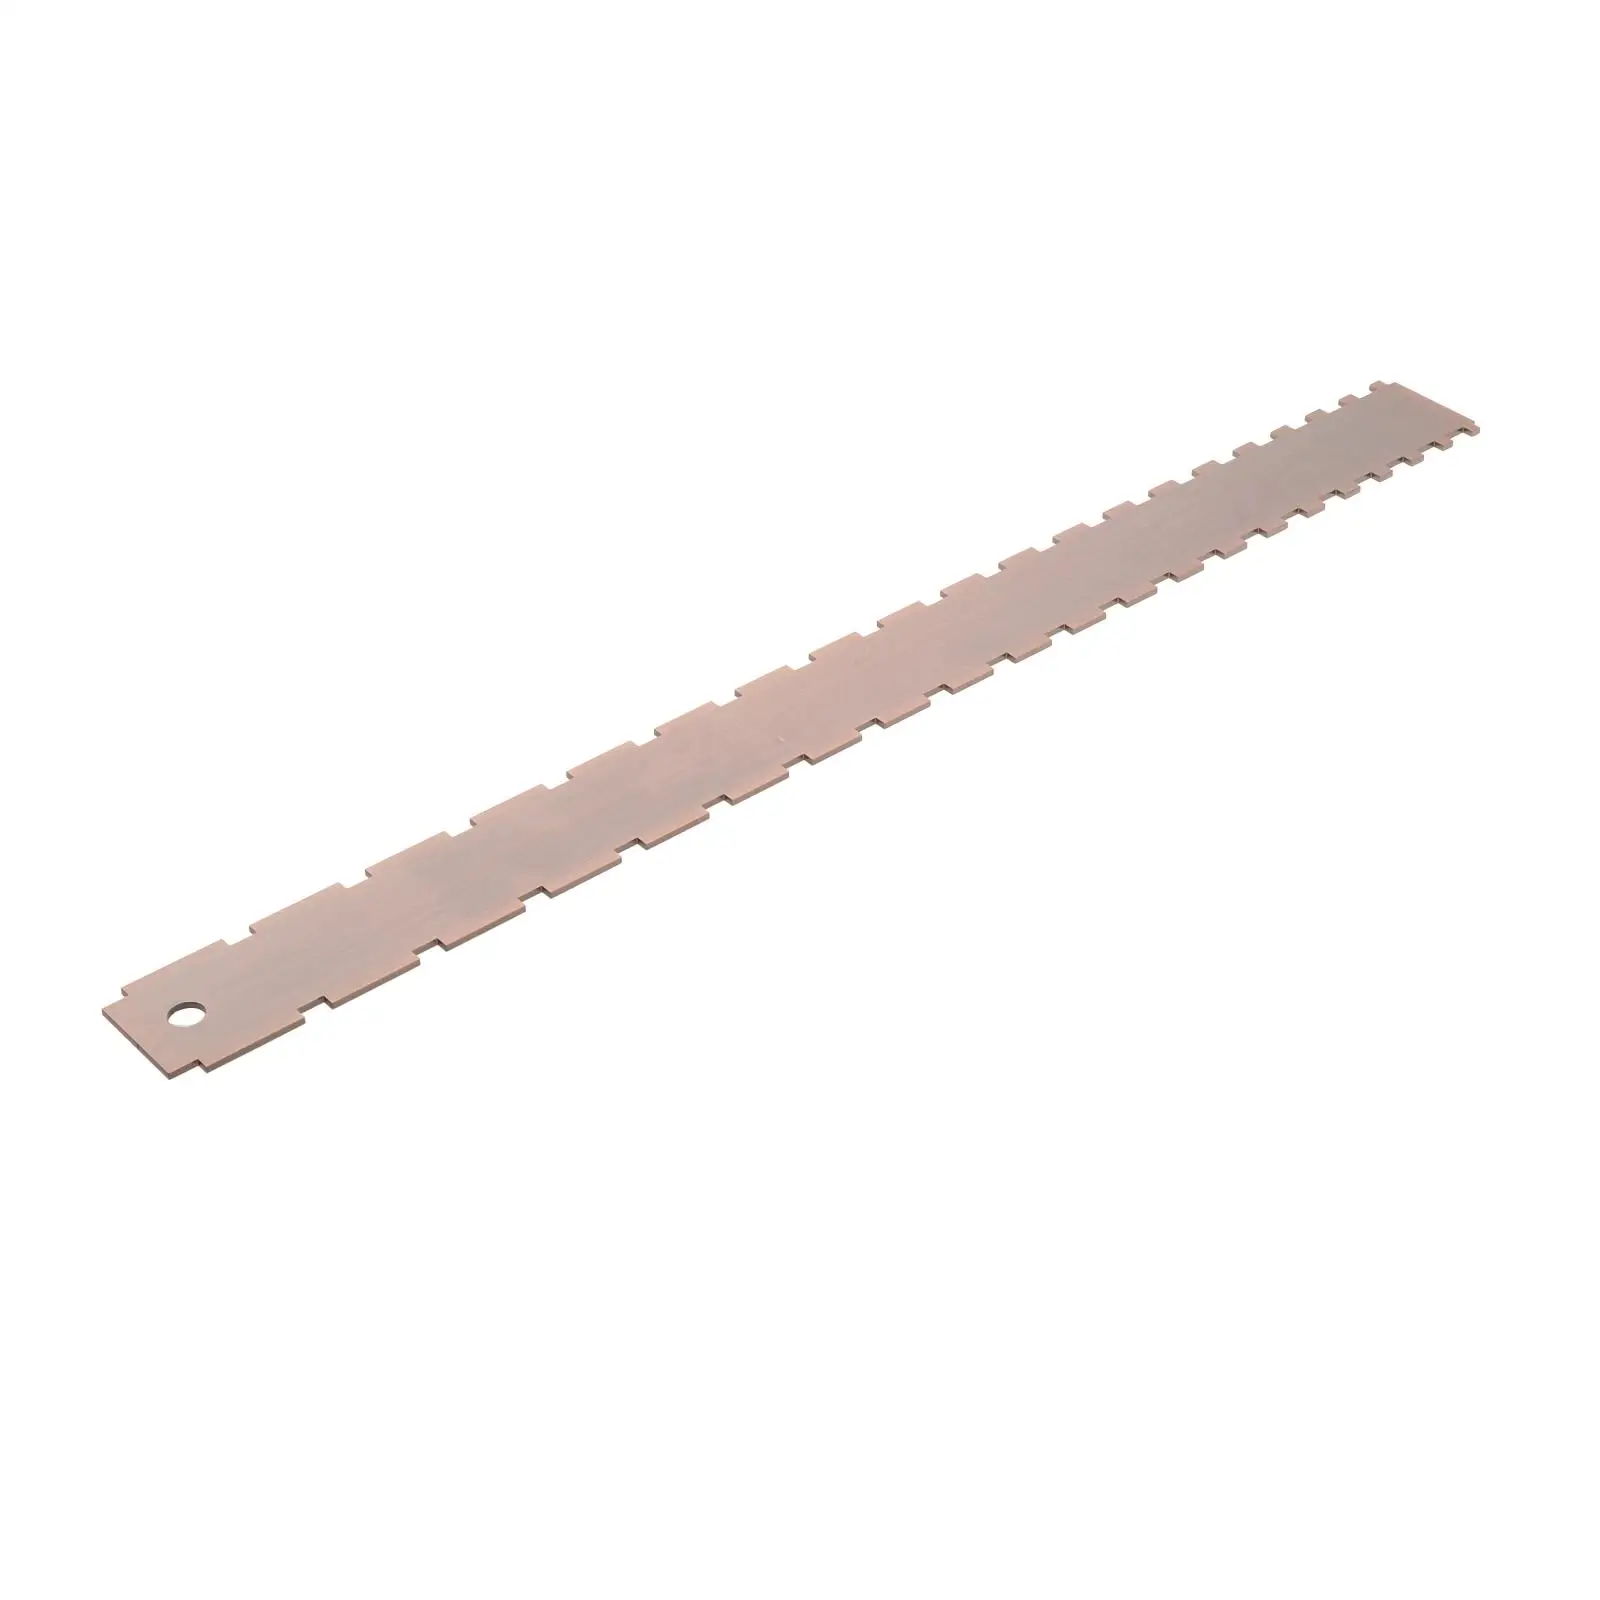 1pc Guitar Neck Notched  Fret Ruler Steel 2 scale Fretboard Fret Measuring Tool for Electric Bass Guitar Luthier Tool